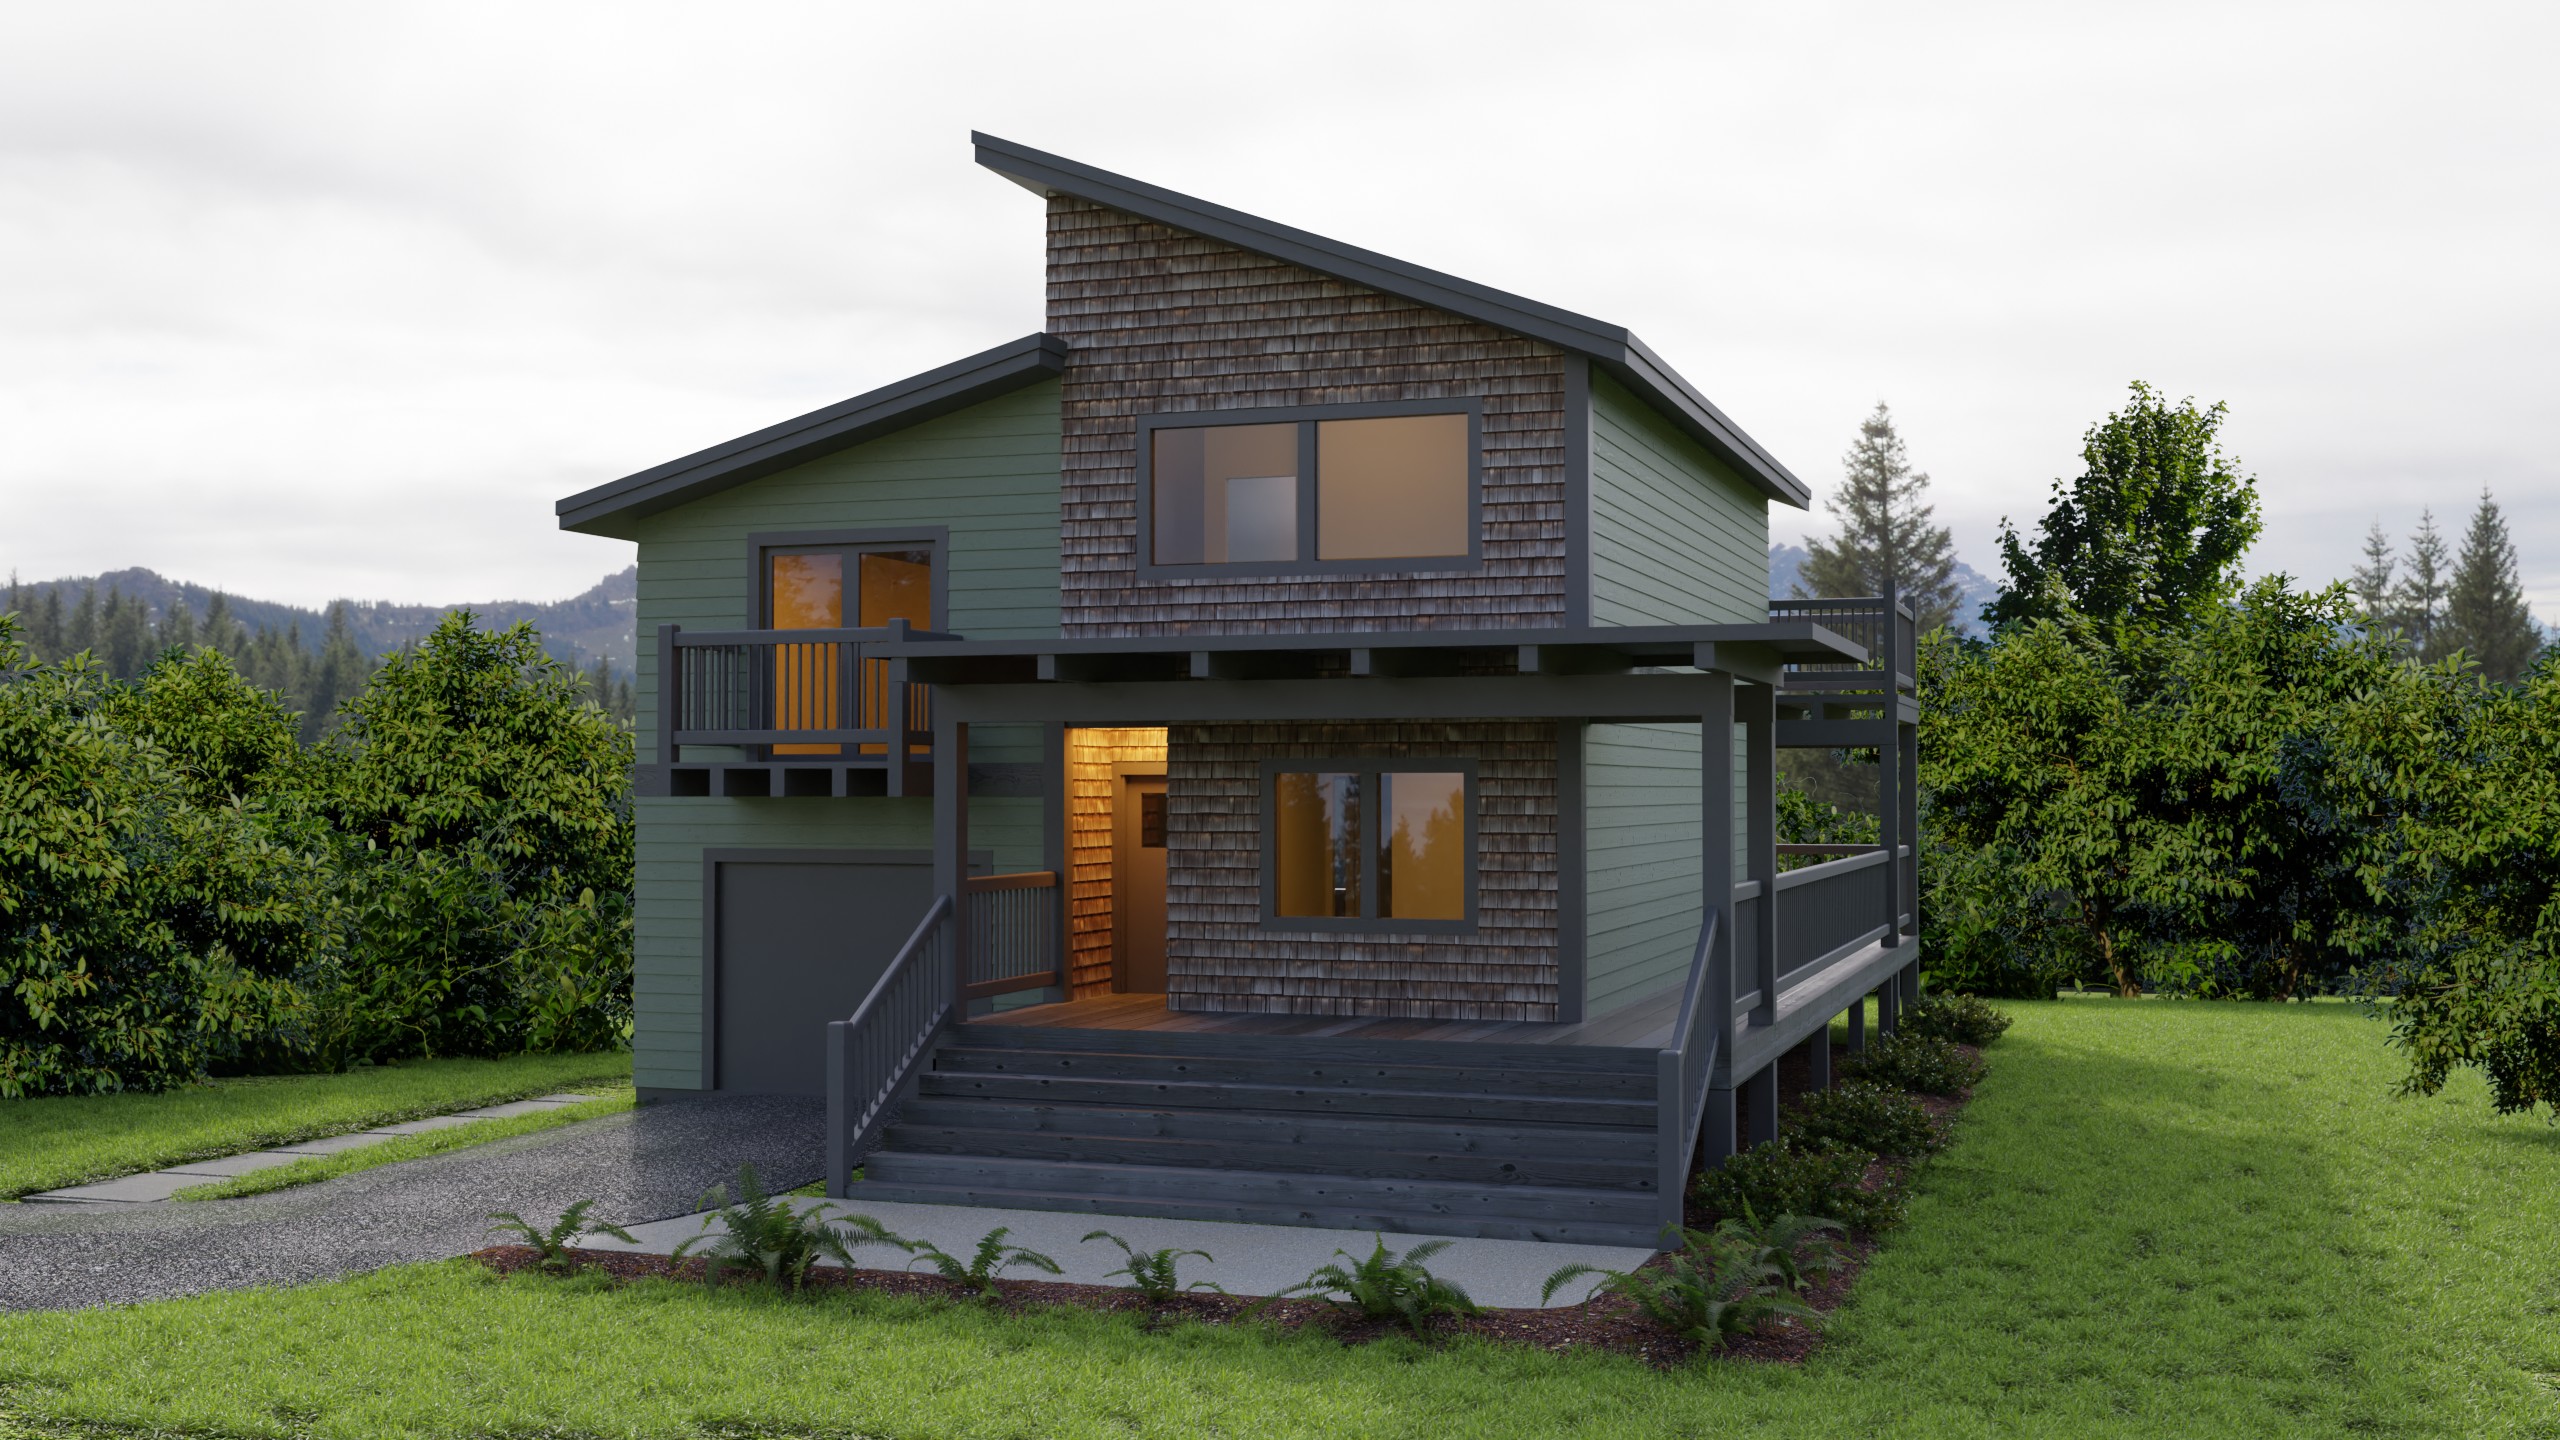 3d model rendering of single family home front